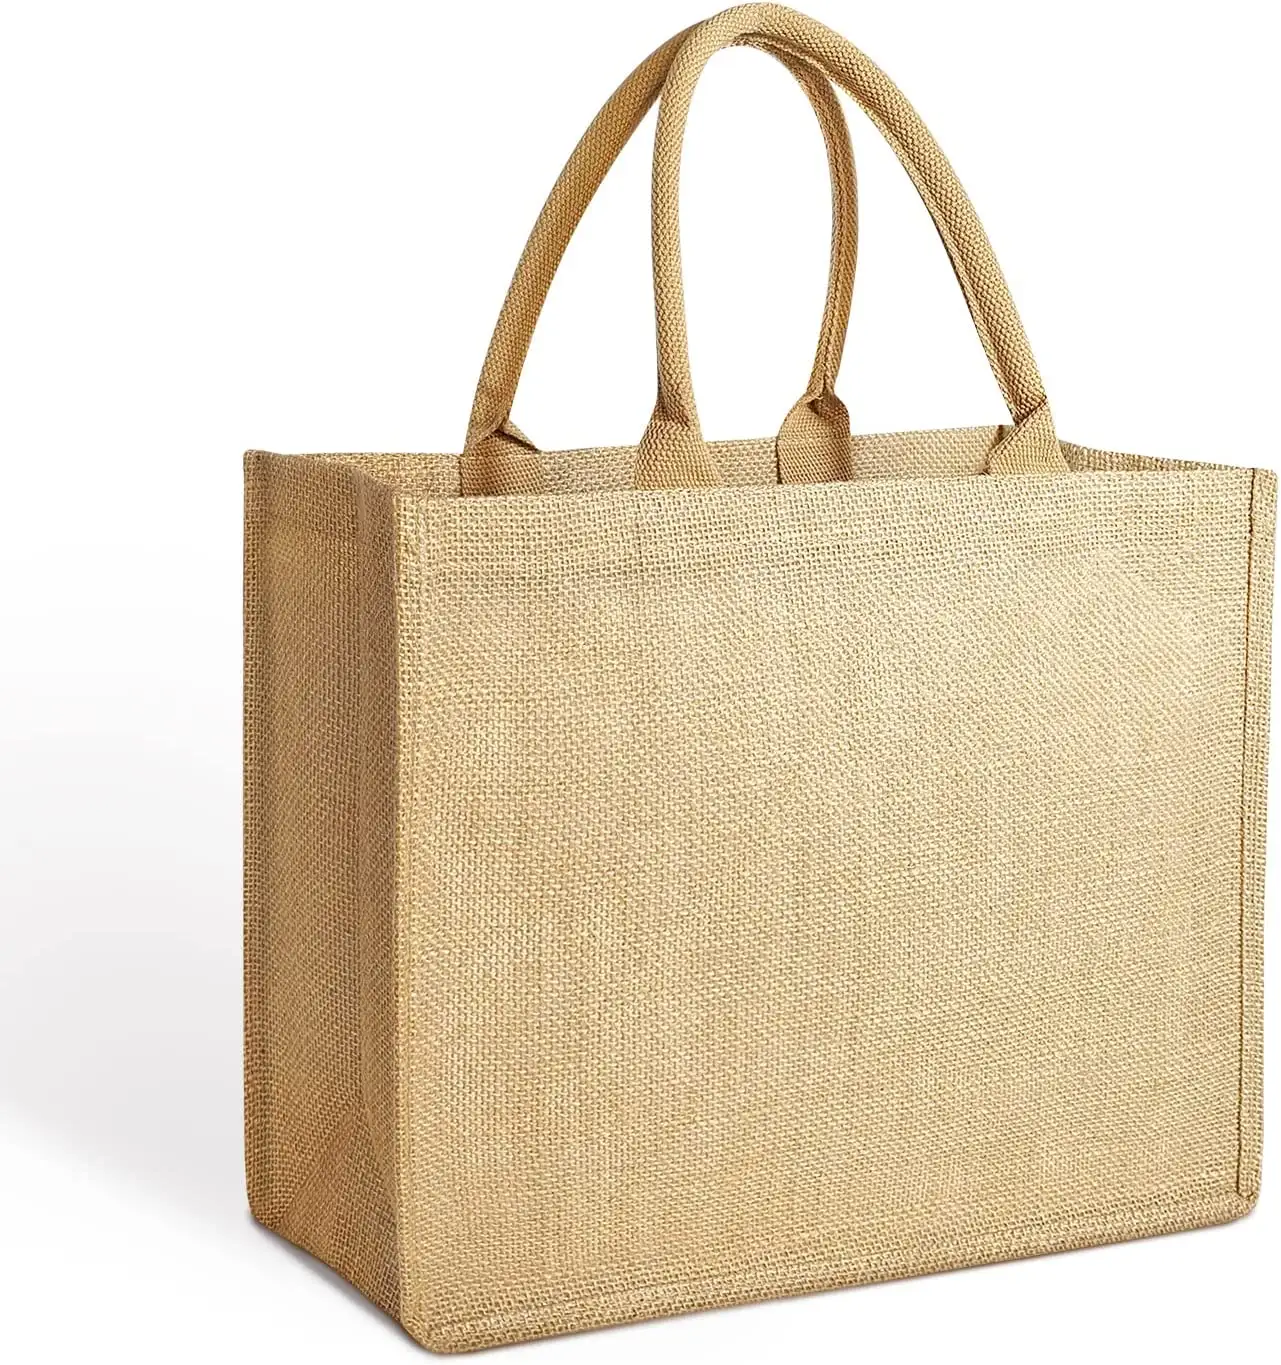 Burlap Jute Tote Bags Reusable Cotton Shopping Grocery Bag with Handles